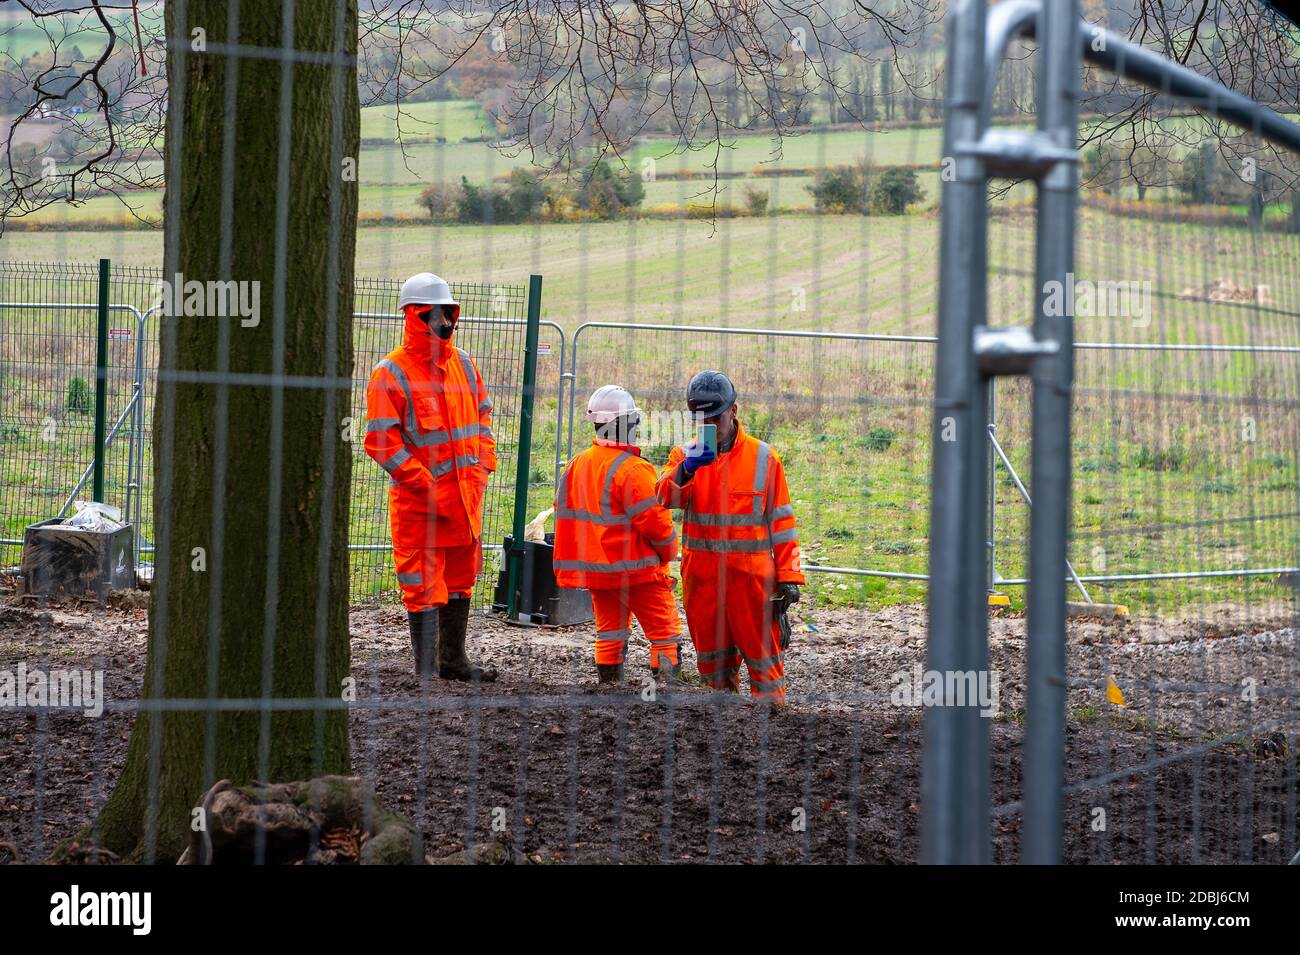 Aylesbury Vale, Buckinghamshire, UK. 17th November, 2020. An HS2 worker films a member of the press taking photos. This is a regular feature of HS2's behaviour. The Woodland Trust have issued a press release asking for an immediate pause on work at the wood to said that they have “grave concerns” that ancient woodland due for imminent destruction by HS2 Ltd might be felled without proper survey work to identify bat roosts, and without the proper licences required by law. Credit: Maureen McLean/Alamy Live News Stock Photo